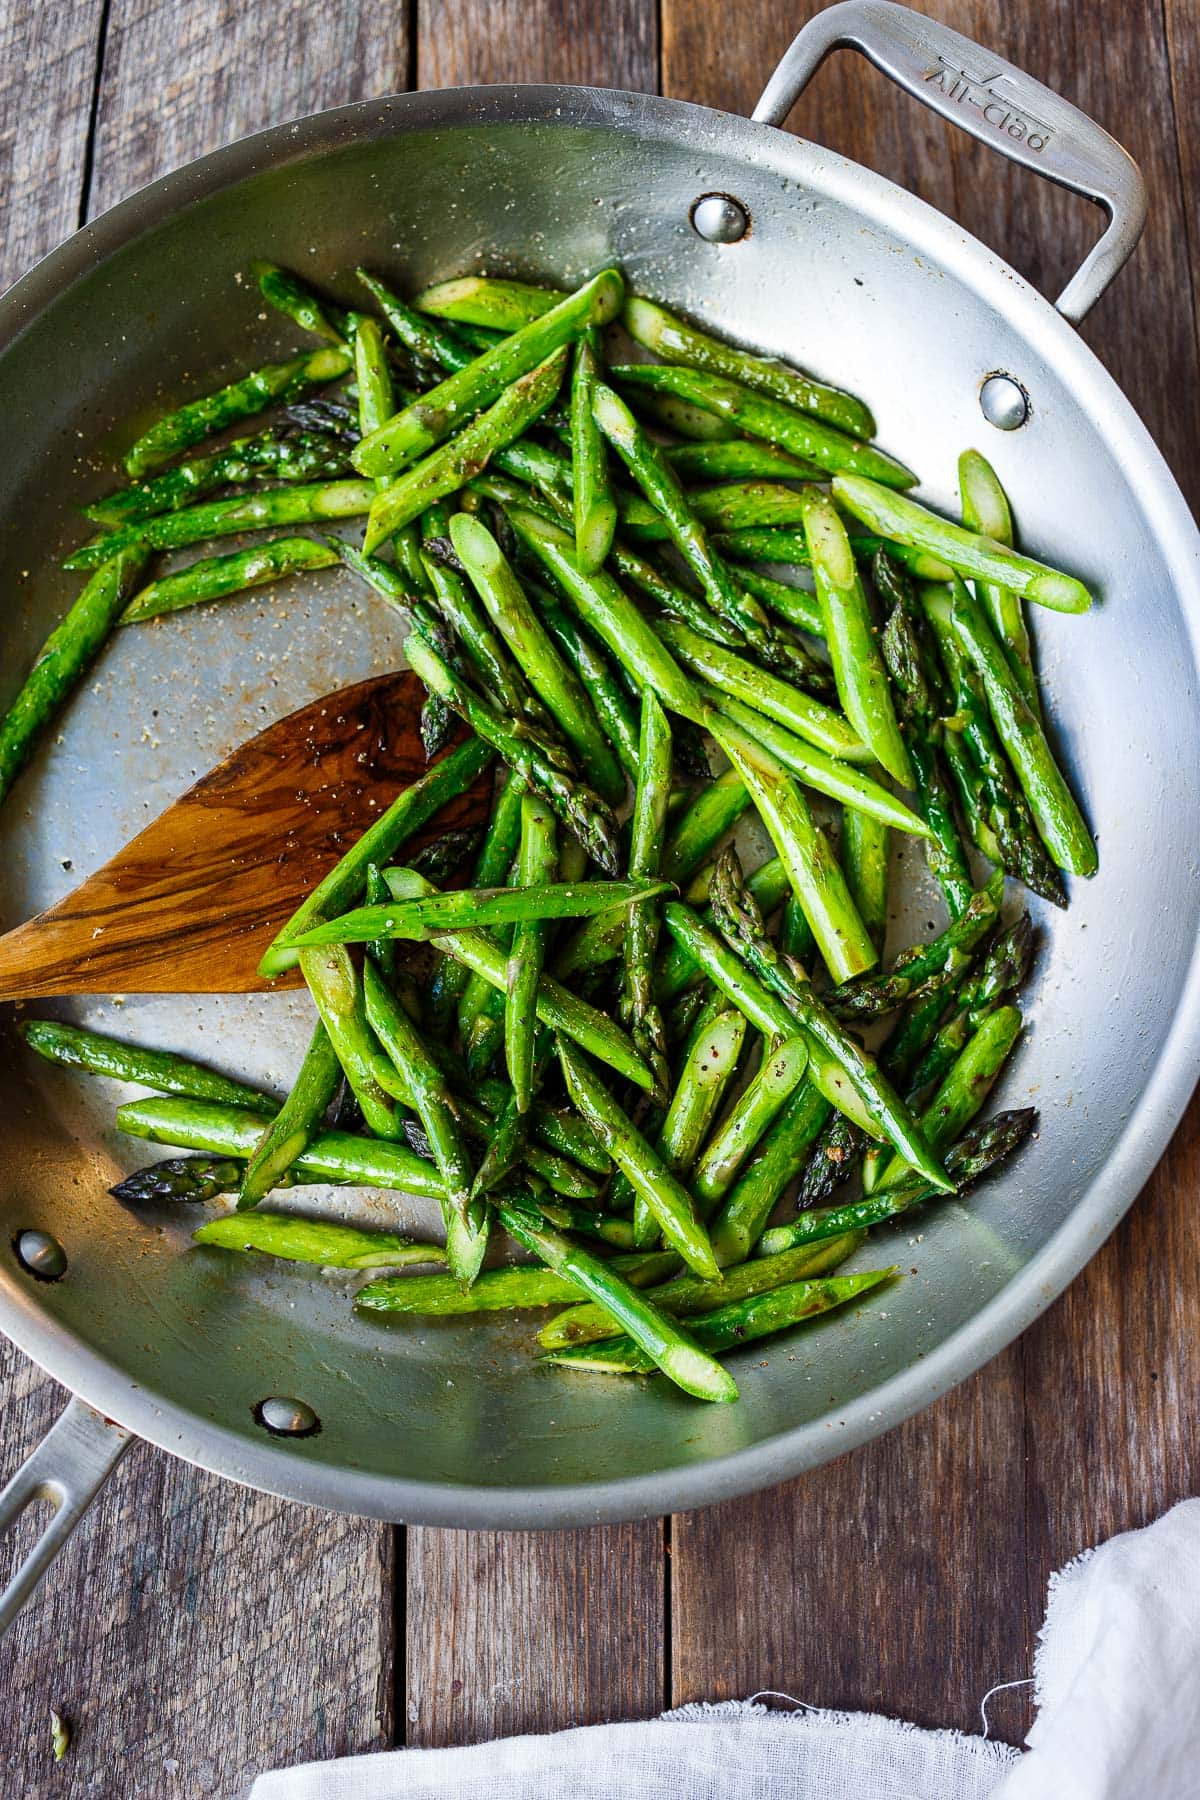 skillet with sauteed asparagus seasoned with salt and pepper.